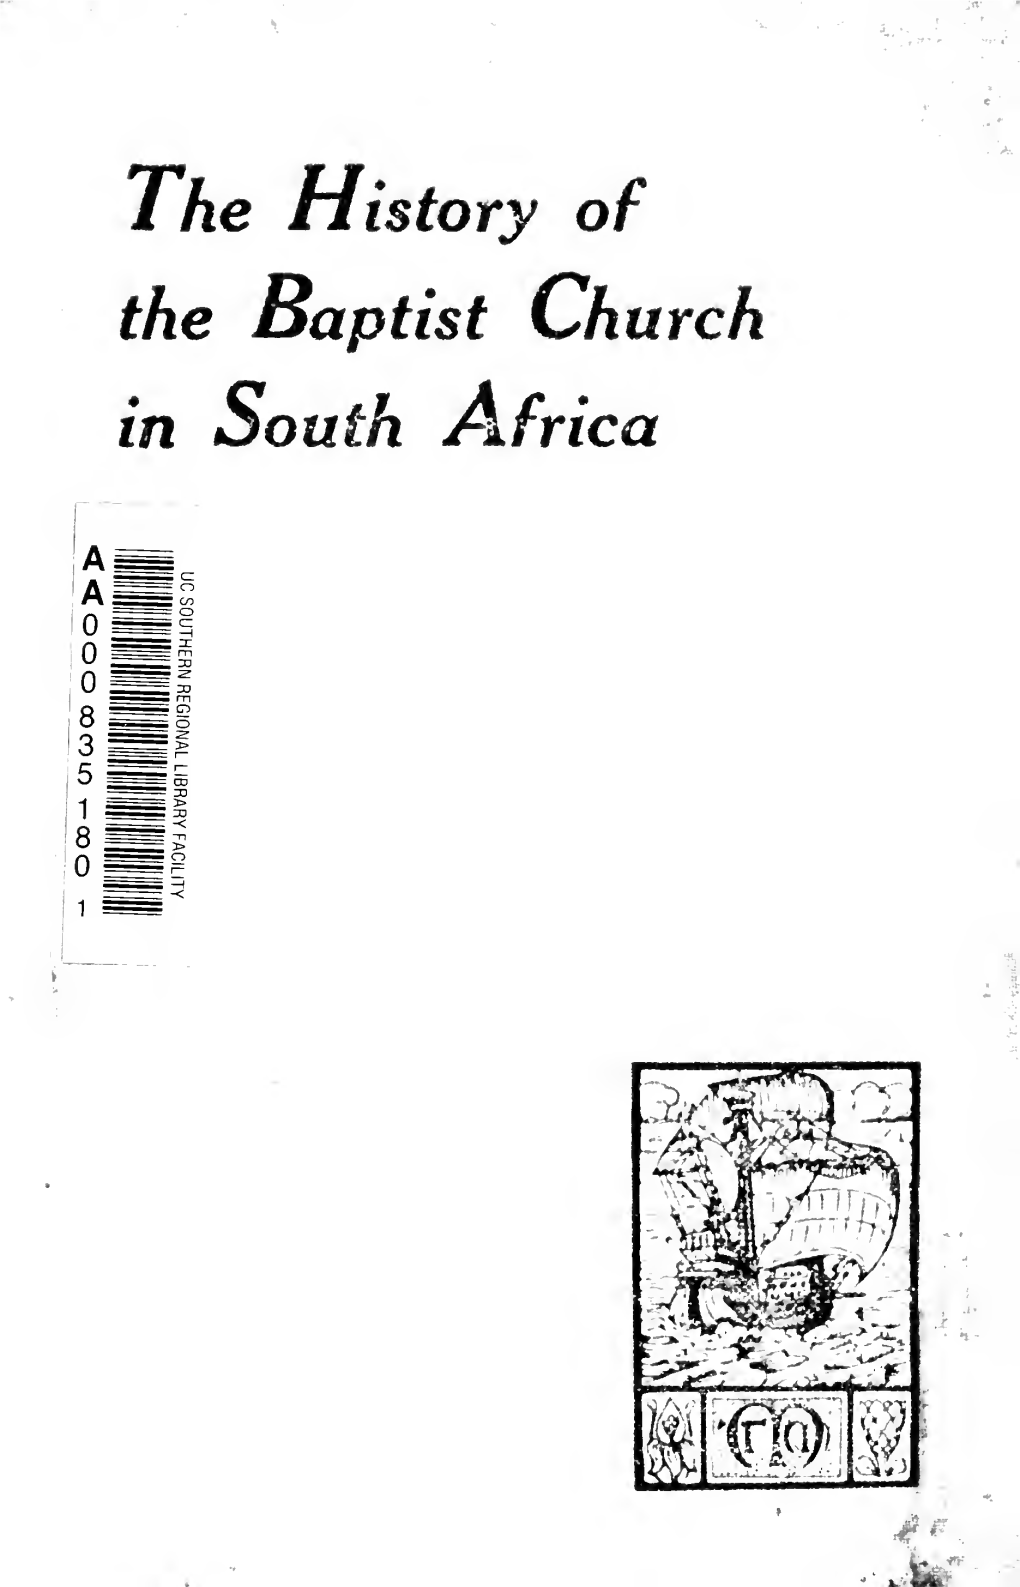 Being the History of the Baptist Church in South Africa